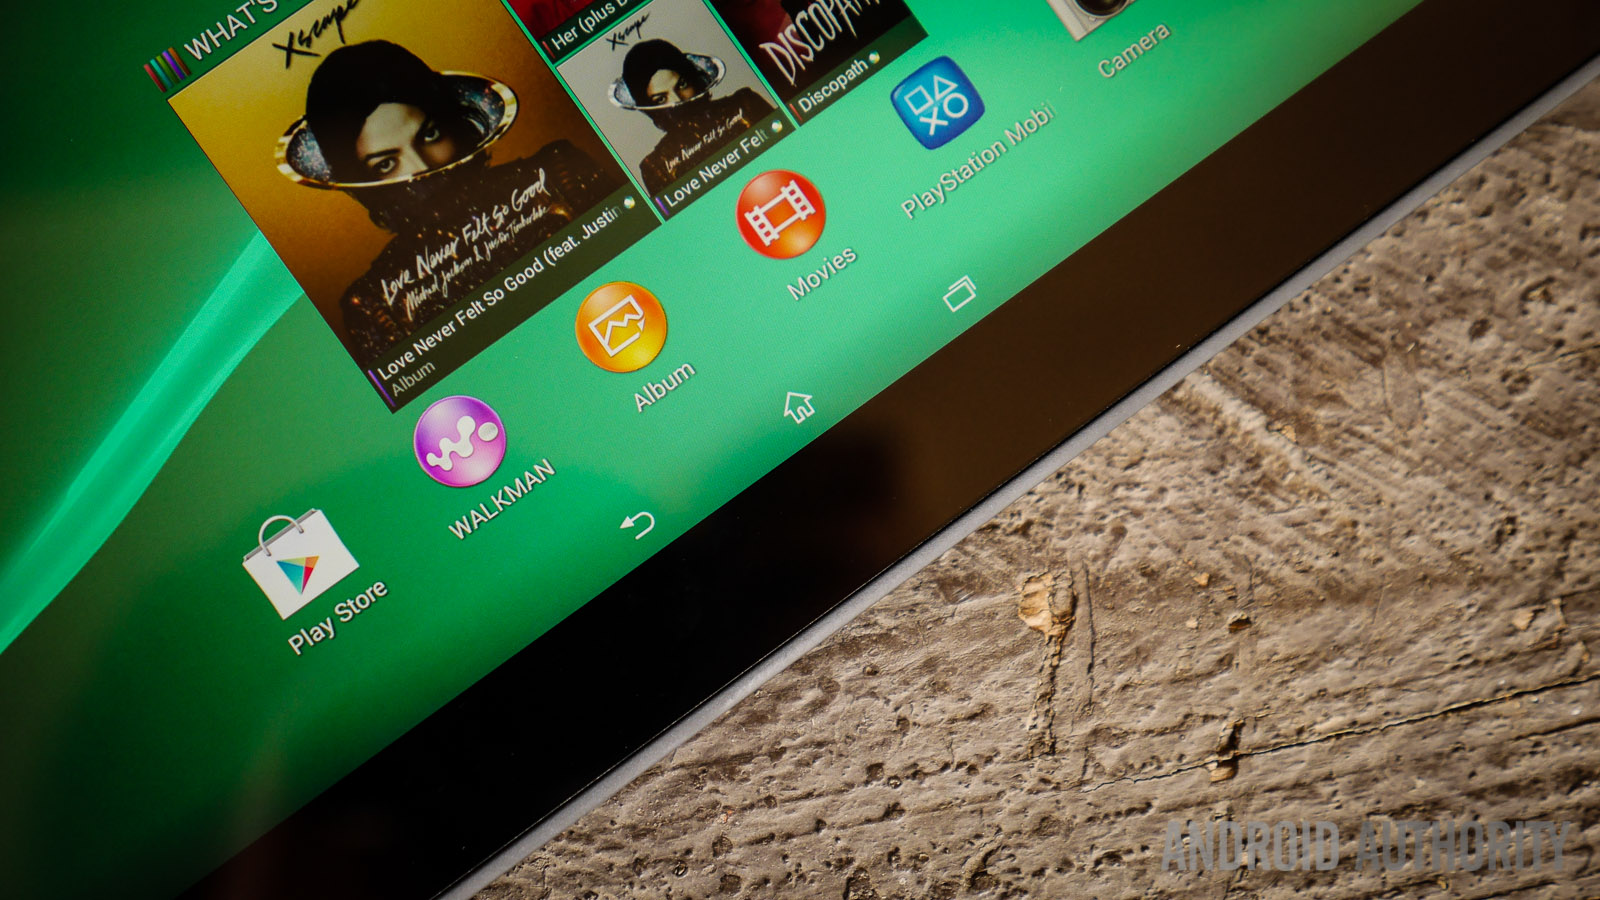 sony xperia z2 tablet review (3 of 17)